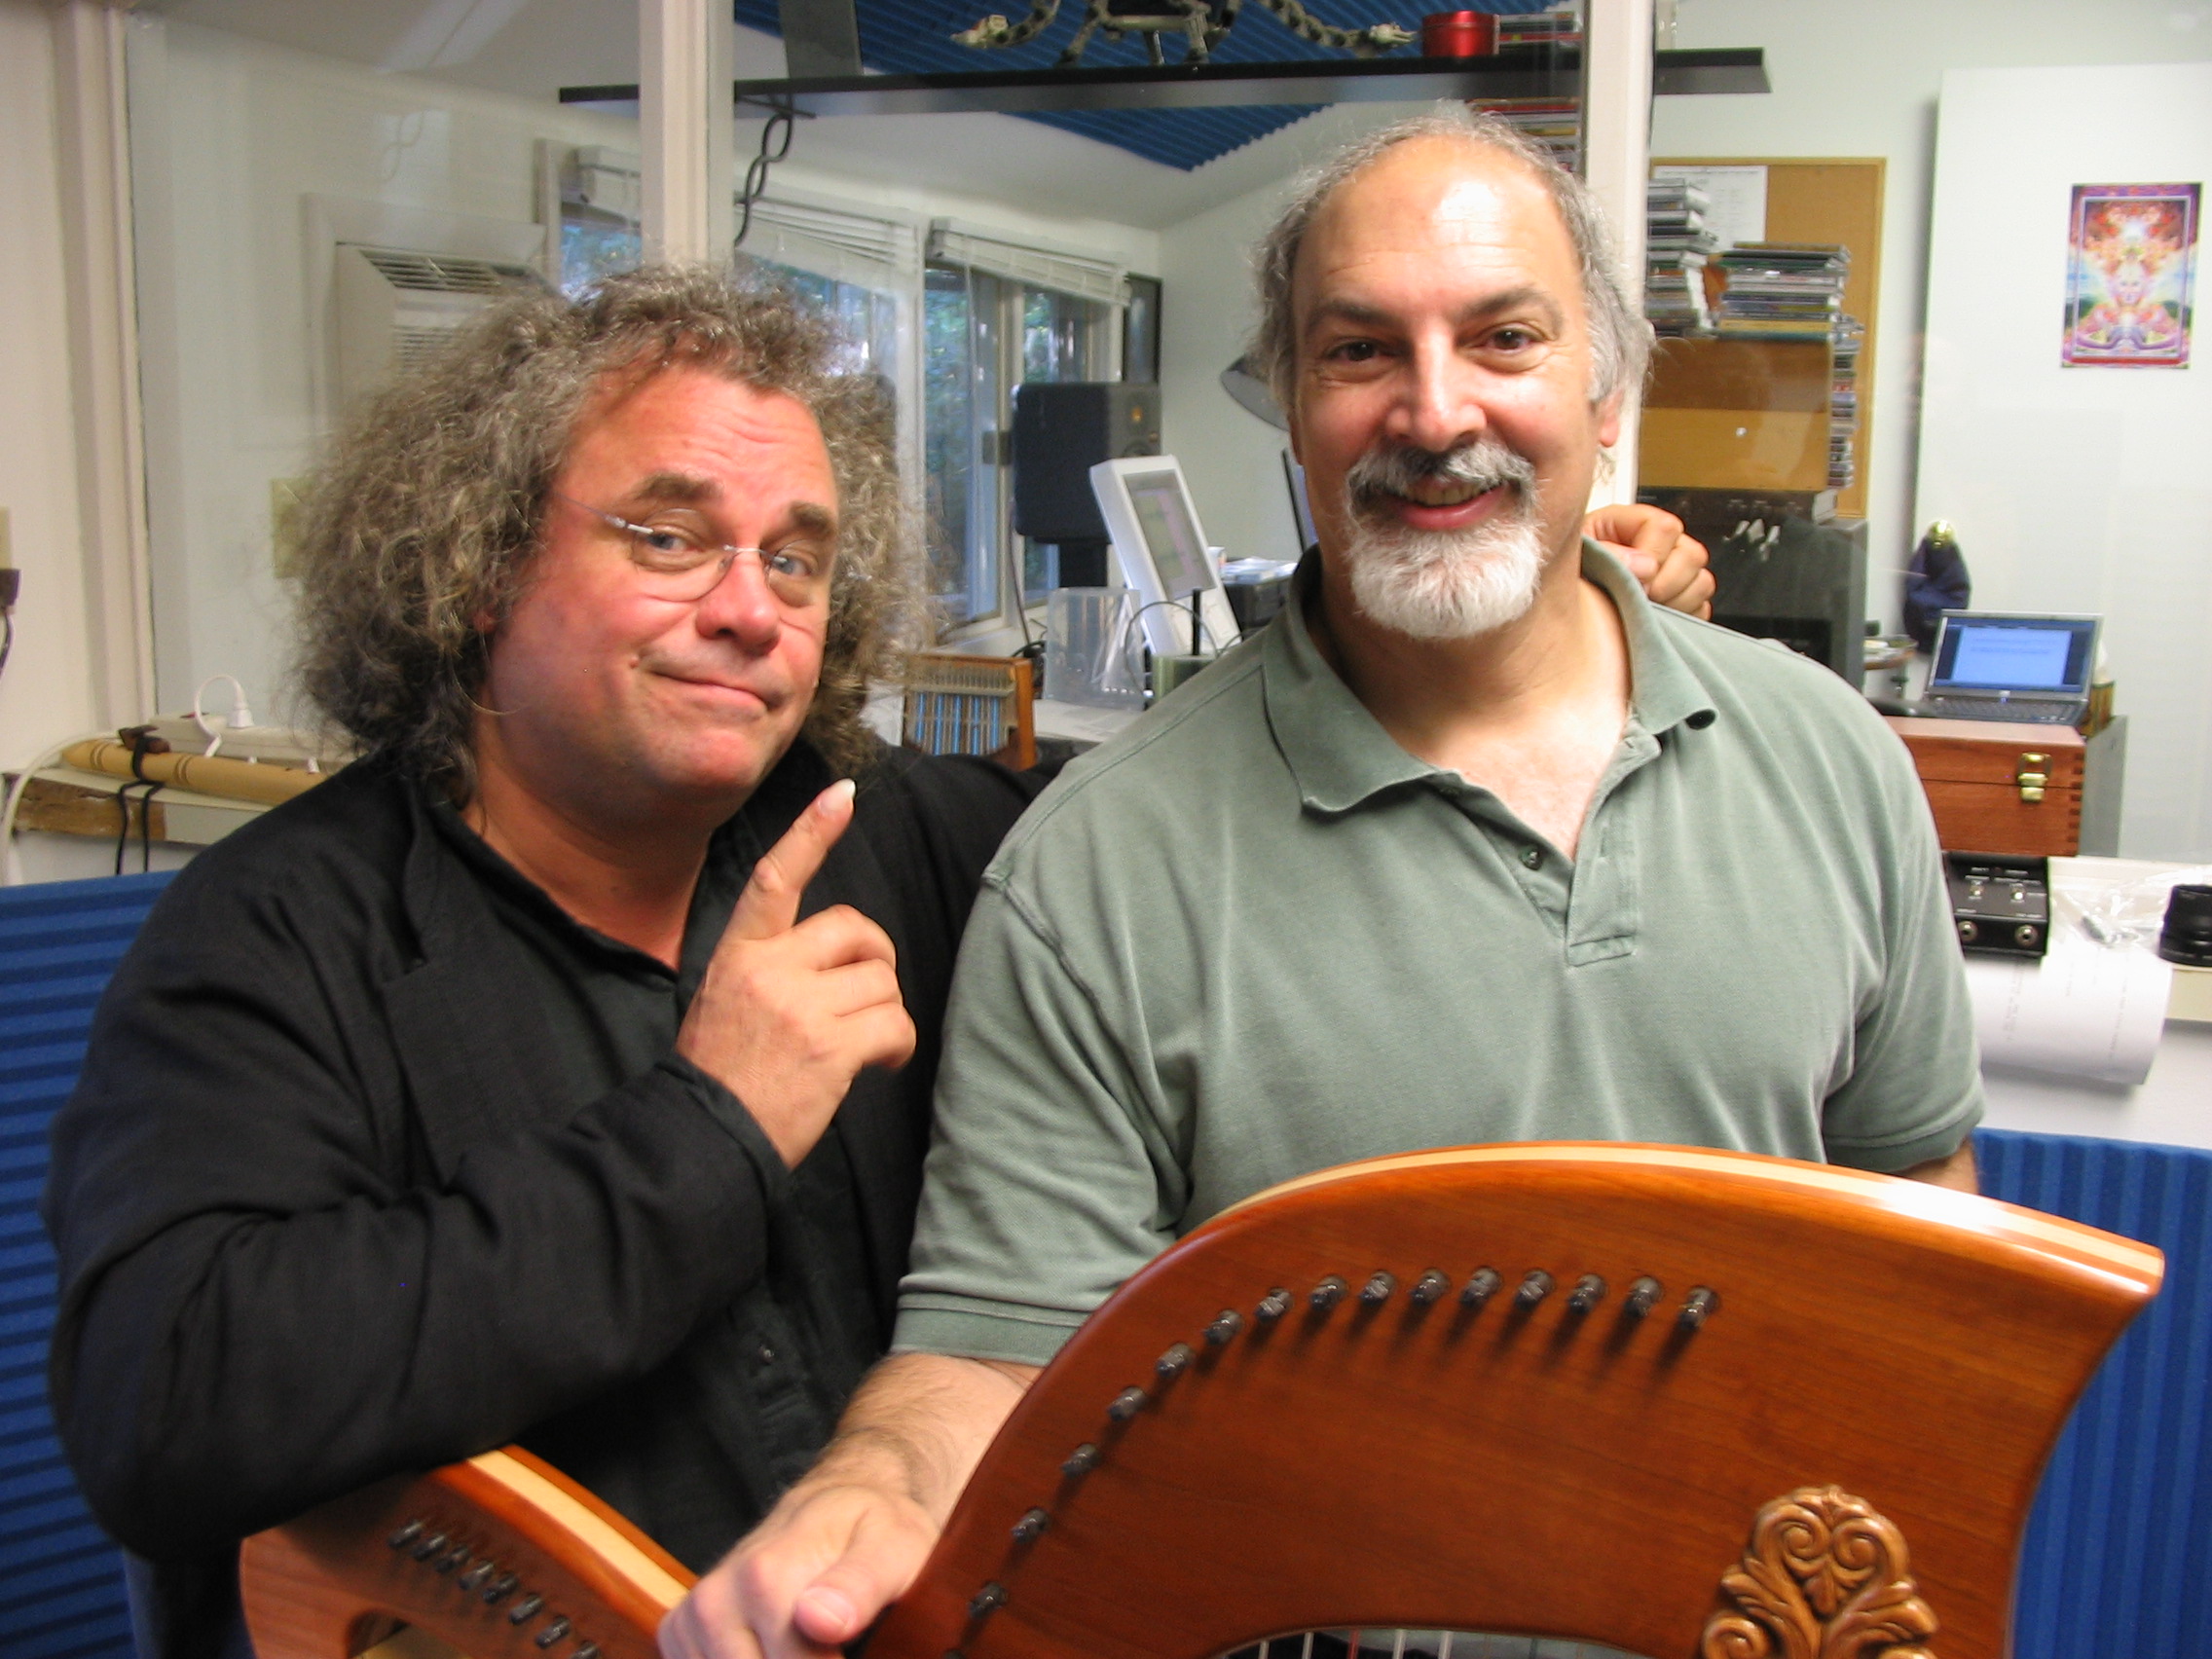 Andreas Vollenweider & John Diliberto on Echoes